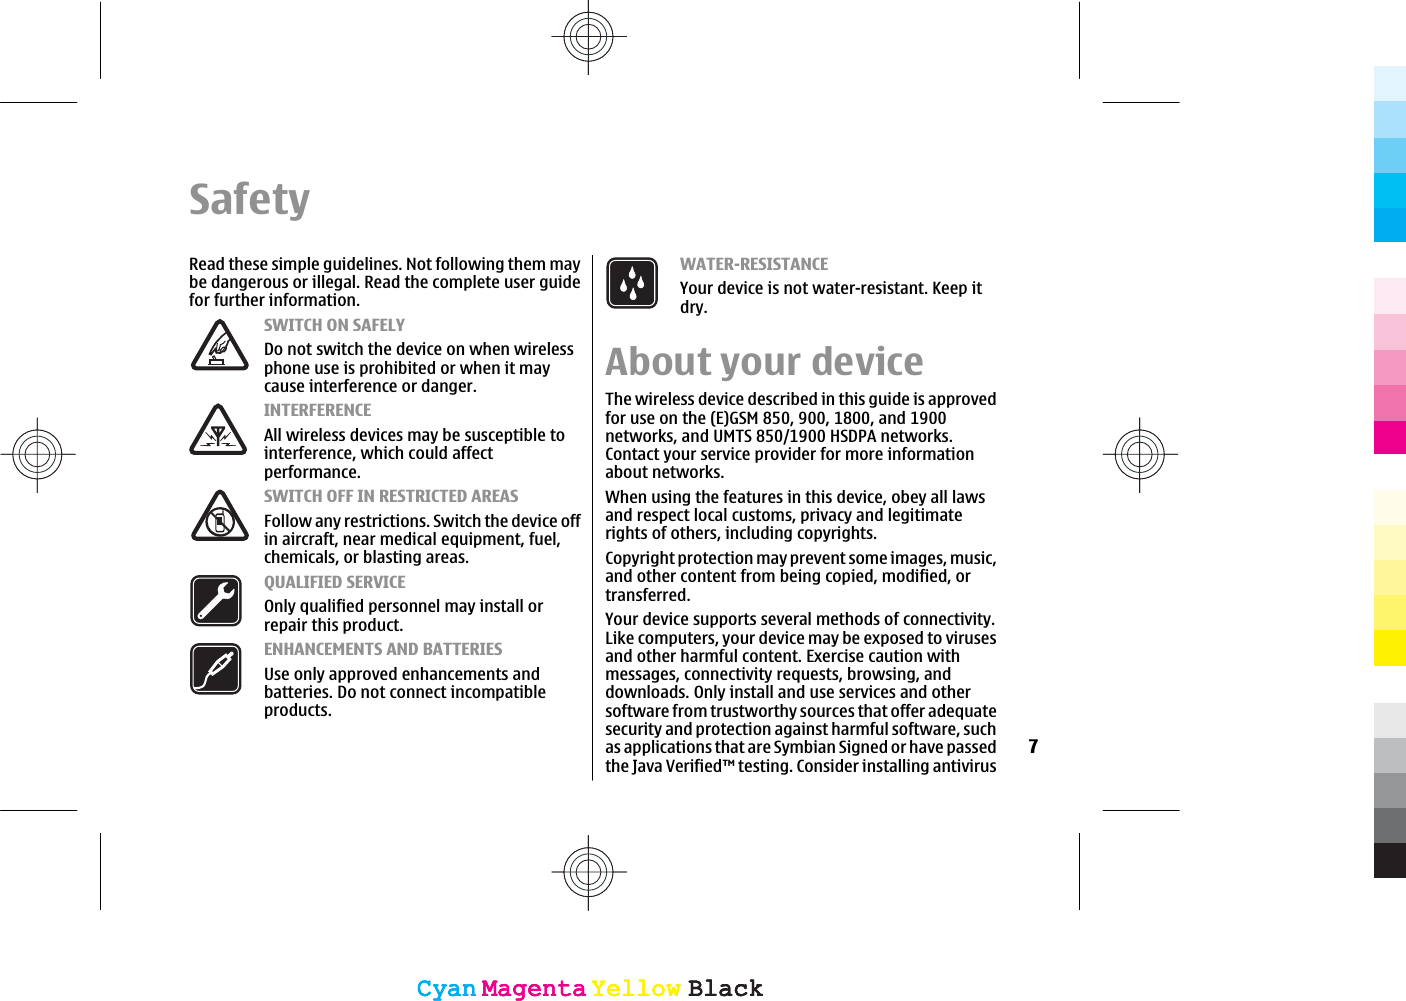 SafetyRead these simple guidelines. Not following them maybe dangerous or illegal. Read the complete user guidefor further information.SWITCH ON SAFELYDo not switch the device on when wirelessphone use is prohibited or when it maycause interference or danger.INTERFERENCEAll wireless devices may be susceptible tointerference, which could affectperformance.SWITCH OFF IN RESTRICTED AREASFollow any restrictions. Switch the device offin aircraft, near medical equipment, fuel,chemicals, or blasting areas.QUALIFIED SERVICEOnly qualified personnel may install orrepair this product.ENHANCEMENTS AND BATTERIESUse only approved enhancements andbatteries. Do not connect incompatibleproducts.WATER-RESISTANCEYour device is not water-resistant. Keep itdry.About your deviceThe wireless device described in this guide is approvedfor use on the (E)GSM 850, 900, 1800, and 1900networks, and UMTS 850/1900 HSDPA networks.Contact your service provider for more informationabout networks.When using the features in this device, obey all lawsand respect local customs, privacy and legitimaterights of others, including copyrights.Copyright protection may prevent some images, music,and other content from being copied, modified, ortransferred.Your device supports several methods of connectivity.Like computers, your device may be exposed to virusesand other harmful content. Exercise caution withmessages, connectivity requests, browsing, anddownloads. Only install and use services and othersoftware from trustworthy sources that offer adequatesecurity and protection against harmful software, suchas applications that are Symbian Signed or have passedthe Java Verified™ testing. Consider installing antivirus7CyanCyanMagentaMagentaYellowYellowBlackBlackCyanCyanMagentaMagentaYellowYellowBlackBlack